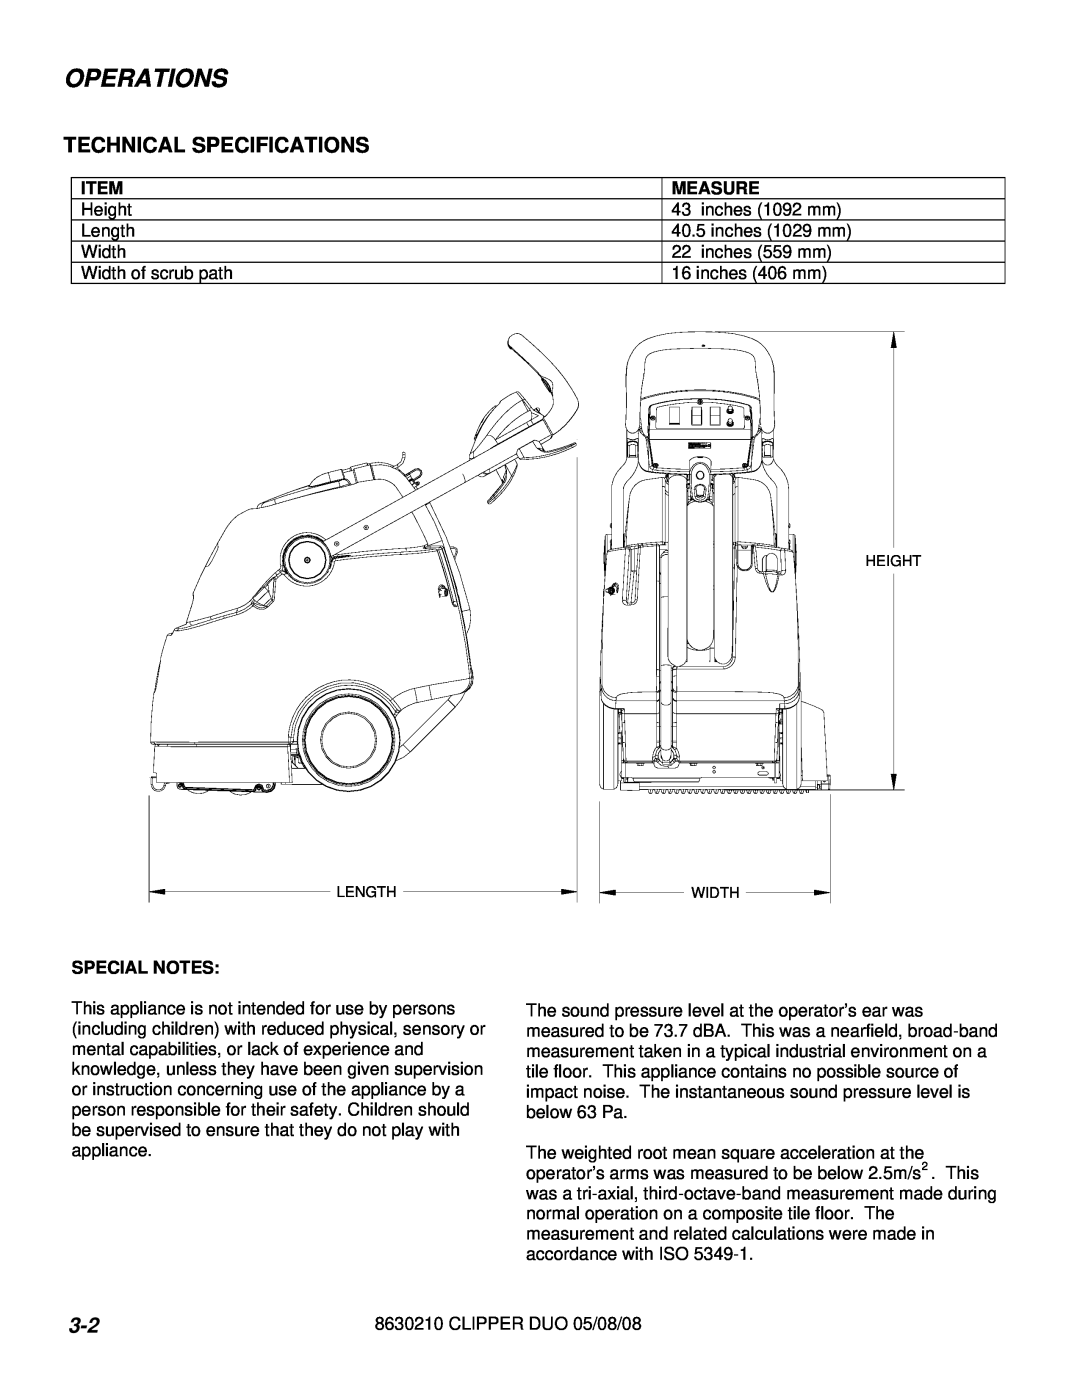 Windsor 10080480 operating instructions Operations, Technical Specifications, Special Notes, Measure 